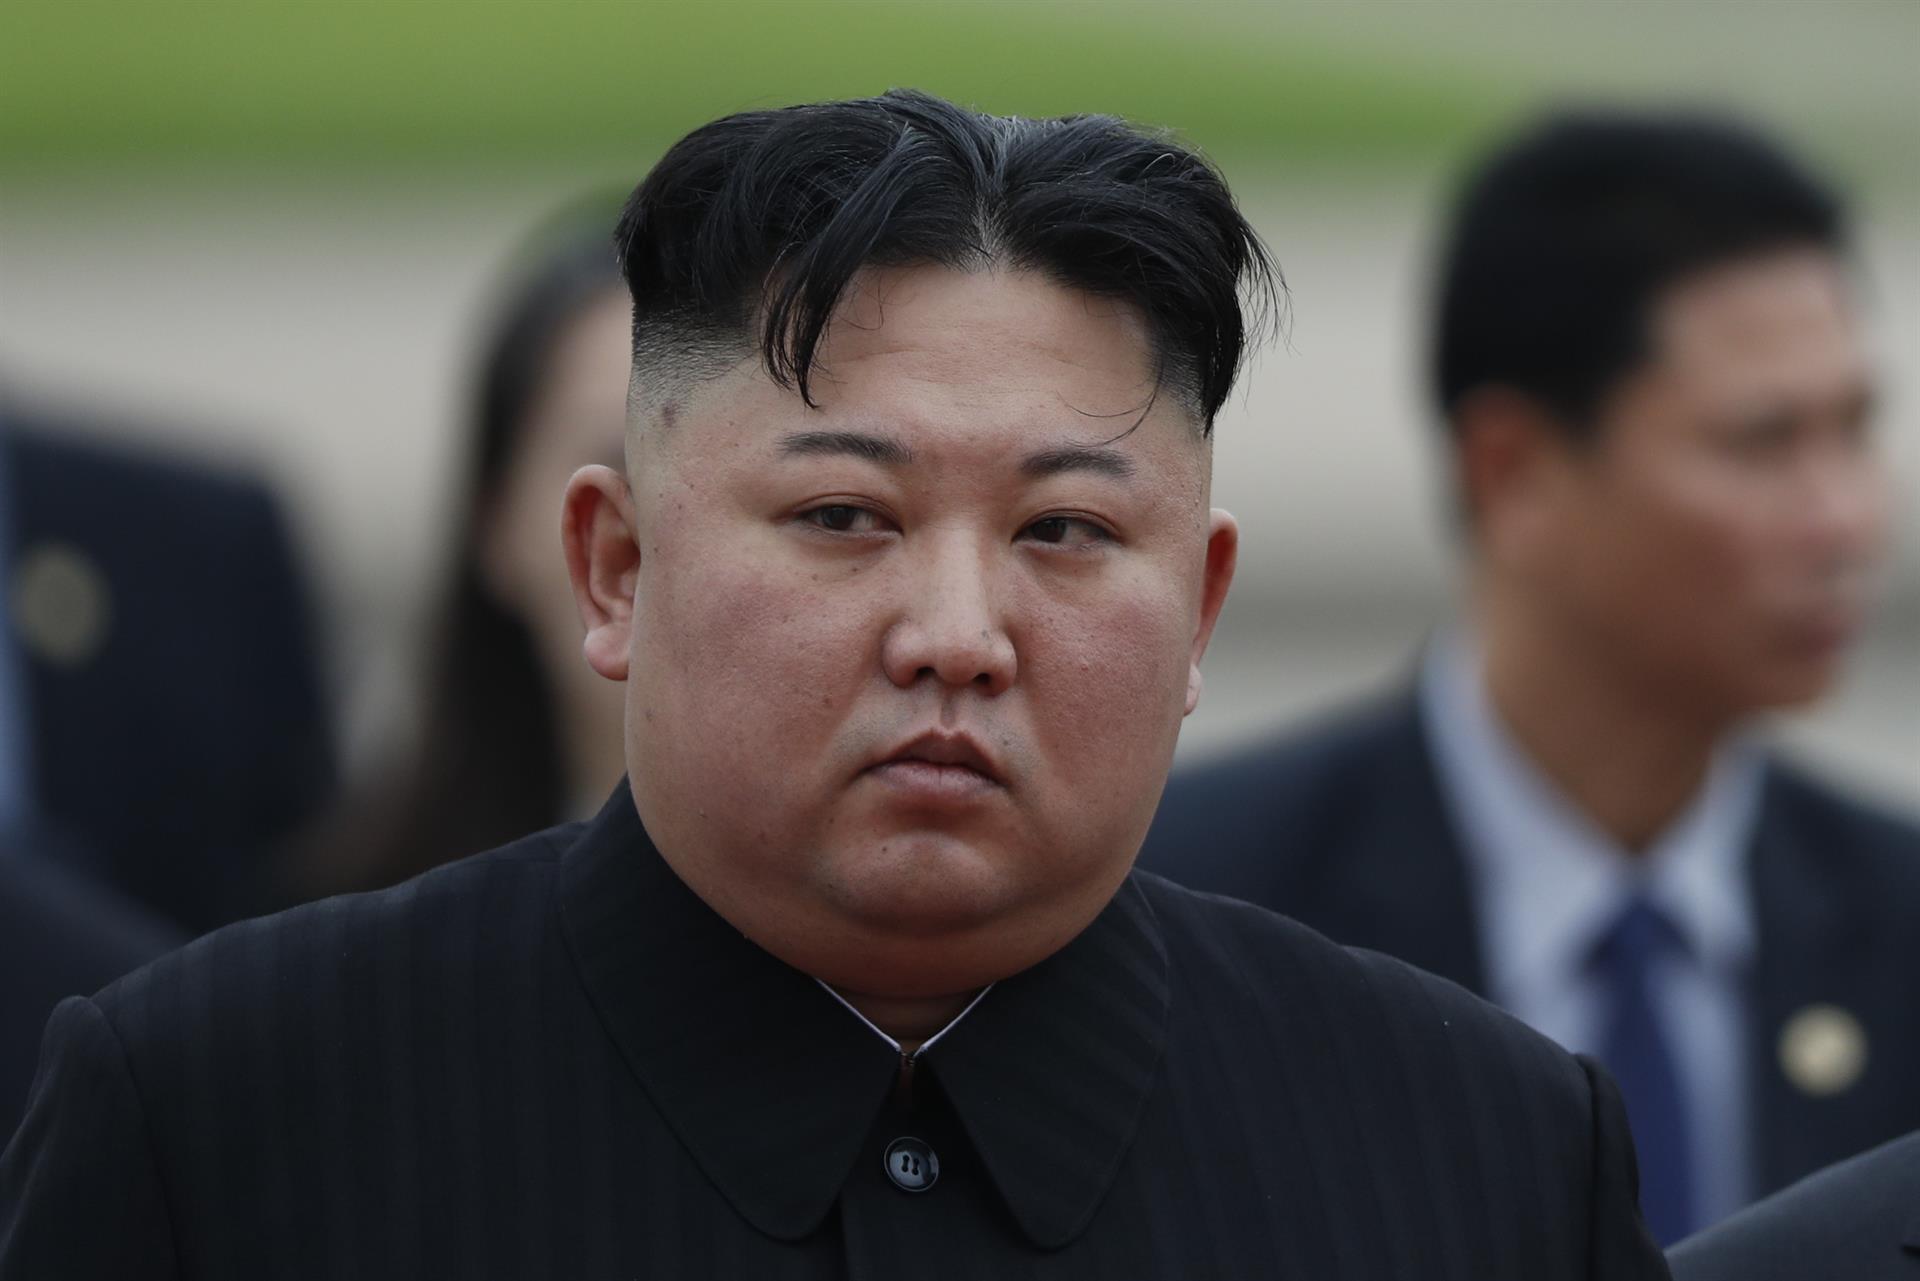 Kim Jong Un said that Pyongyang will continue to improve its weapons capabilities